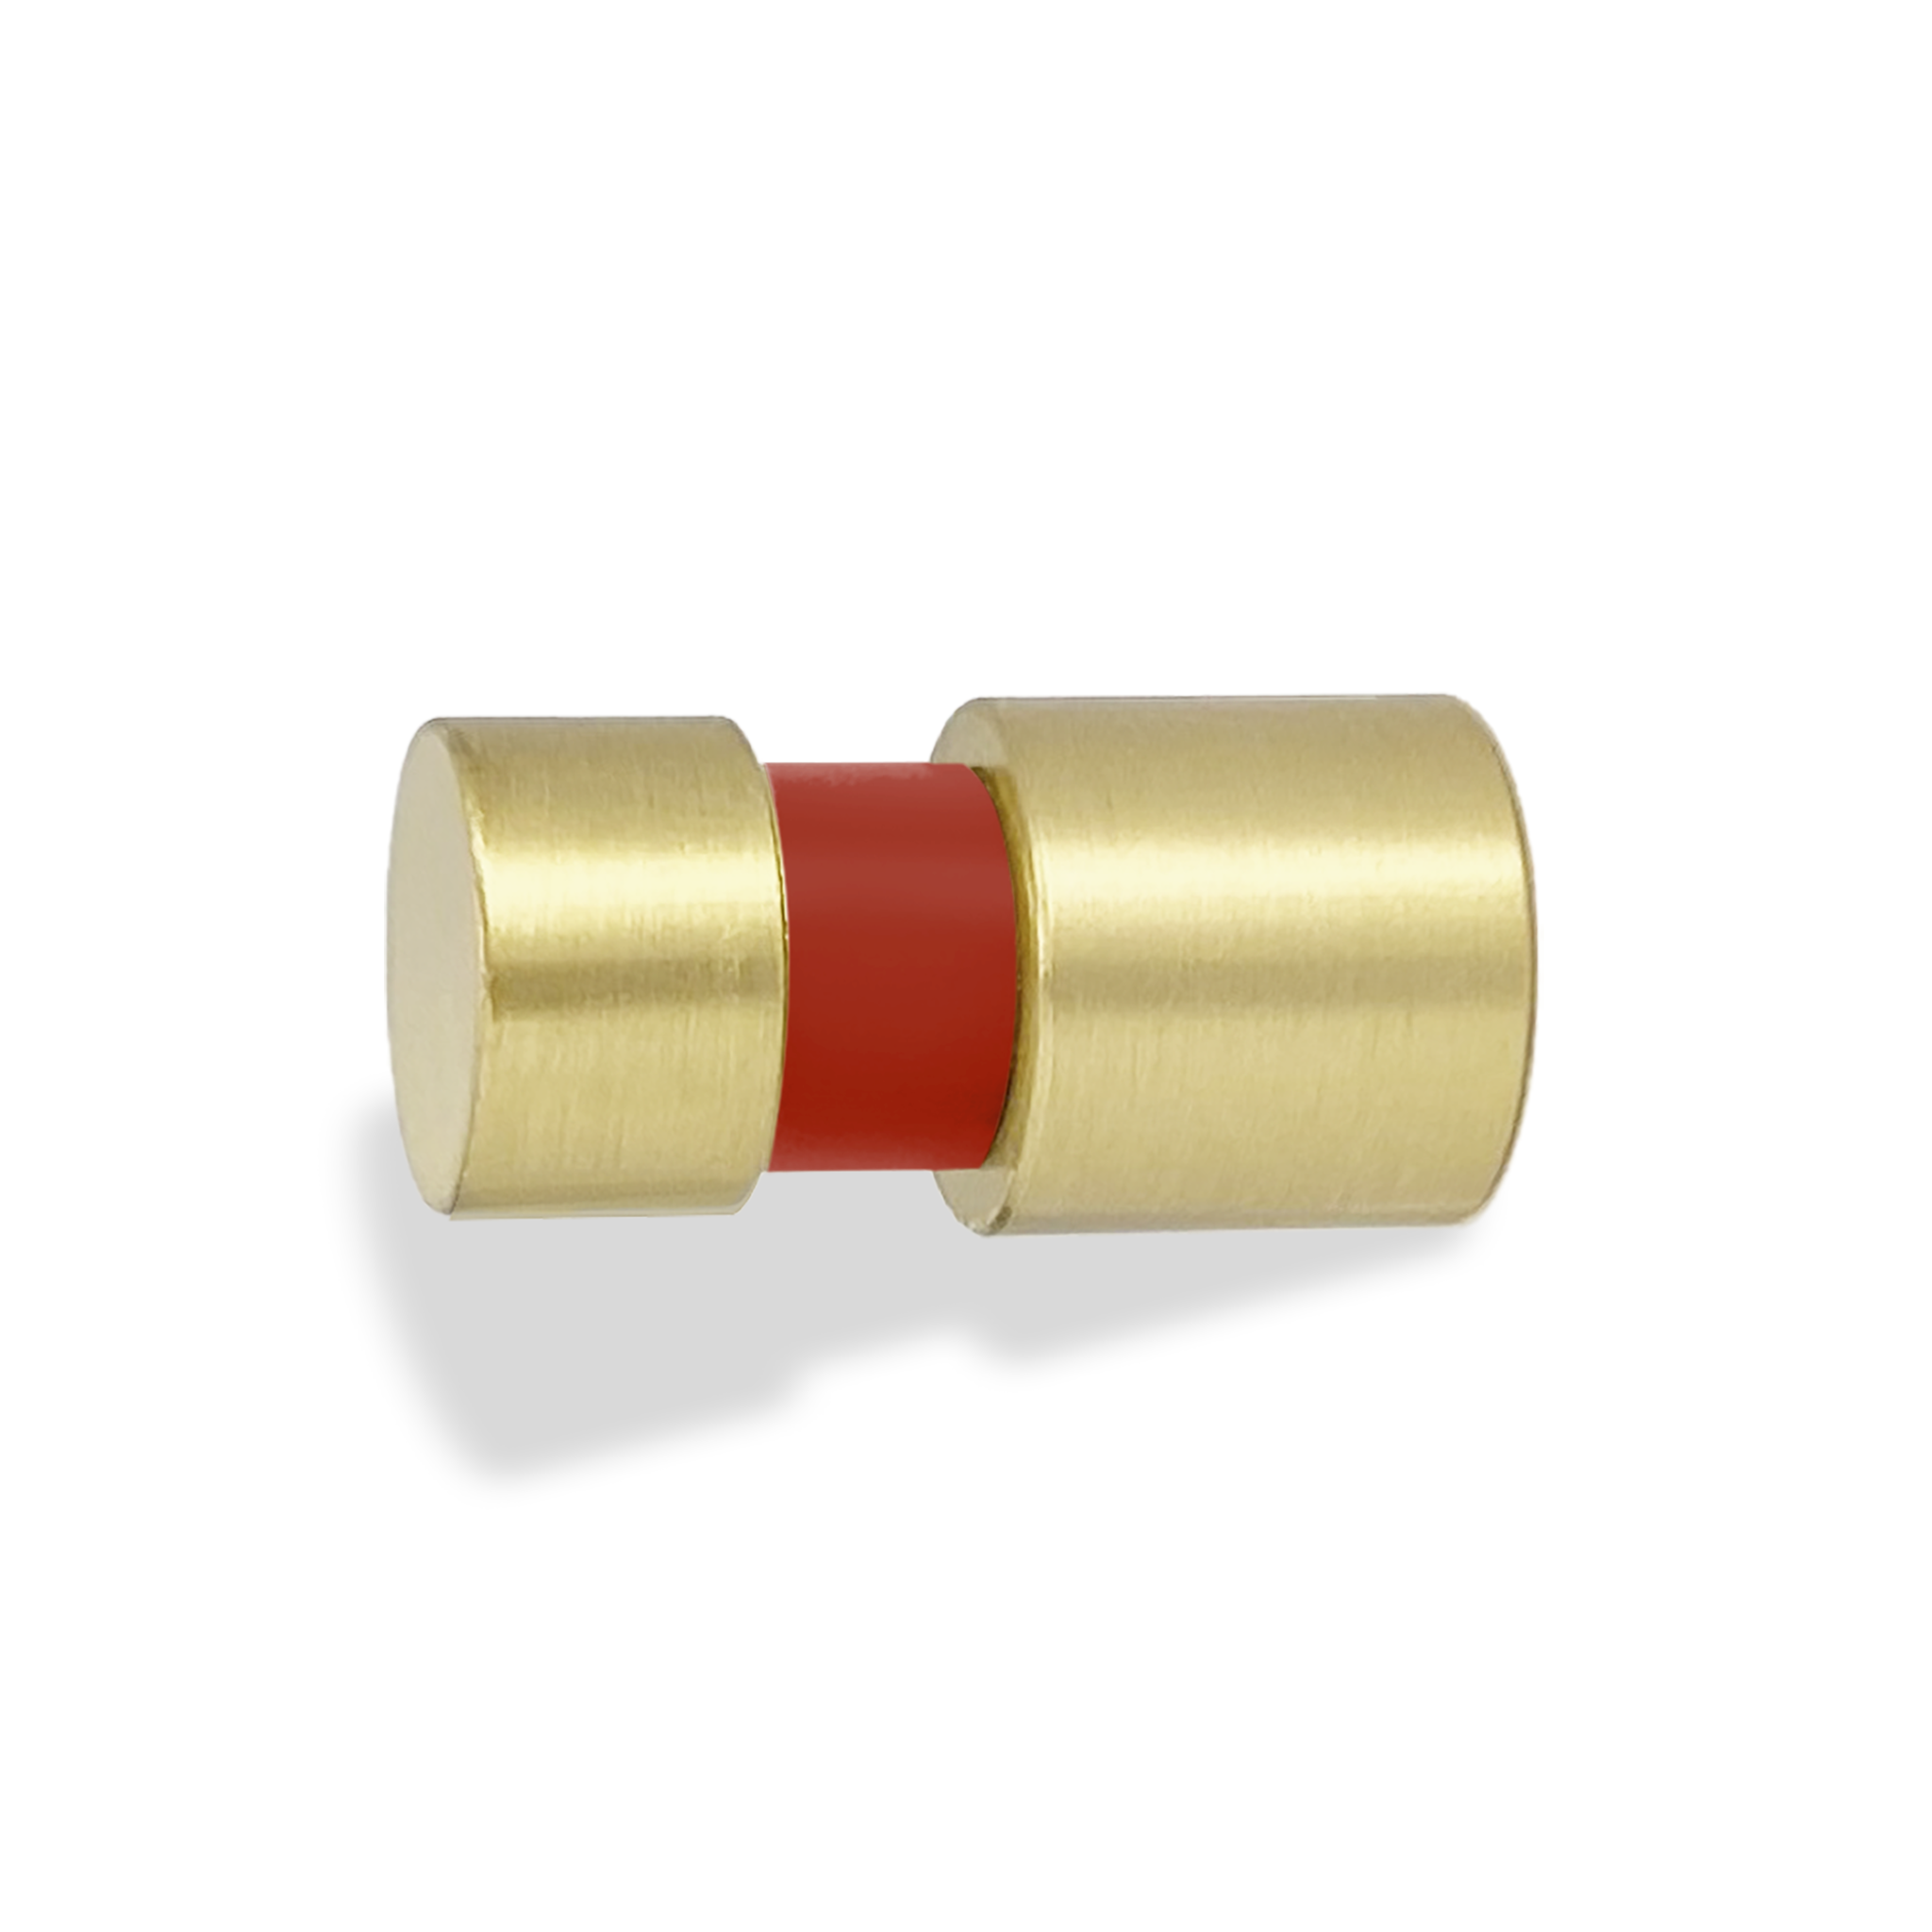 Brass and riding hood red color Beau knob Dutton Brown hardware